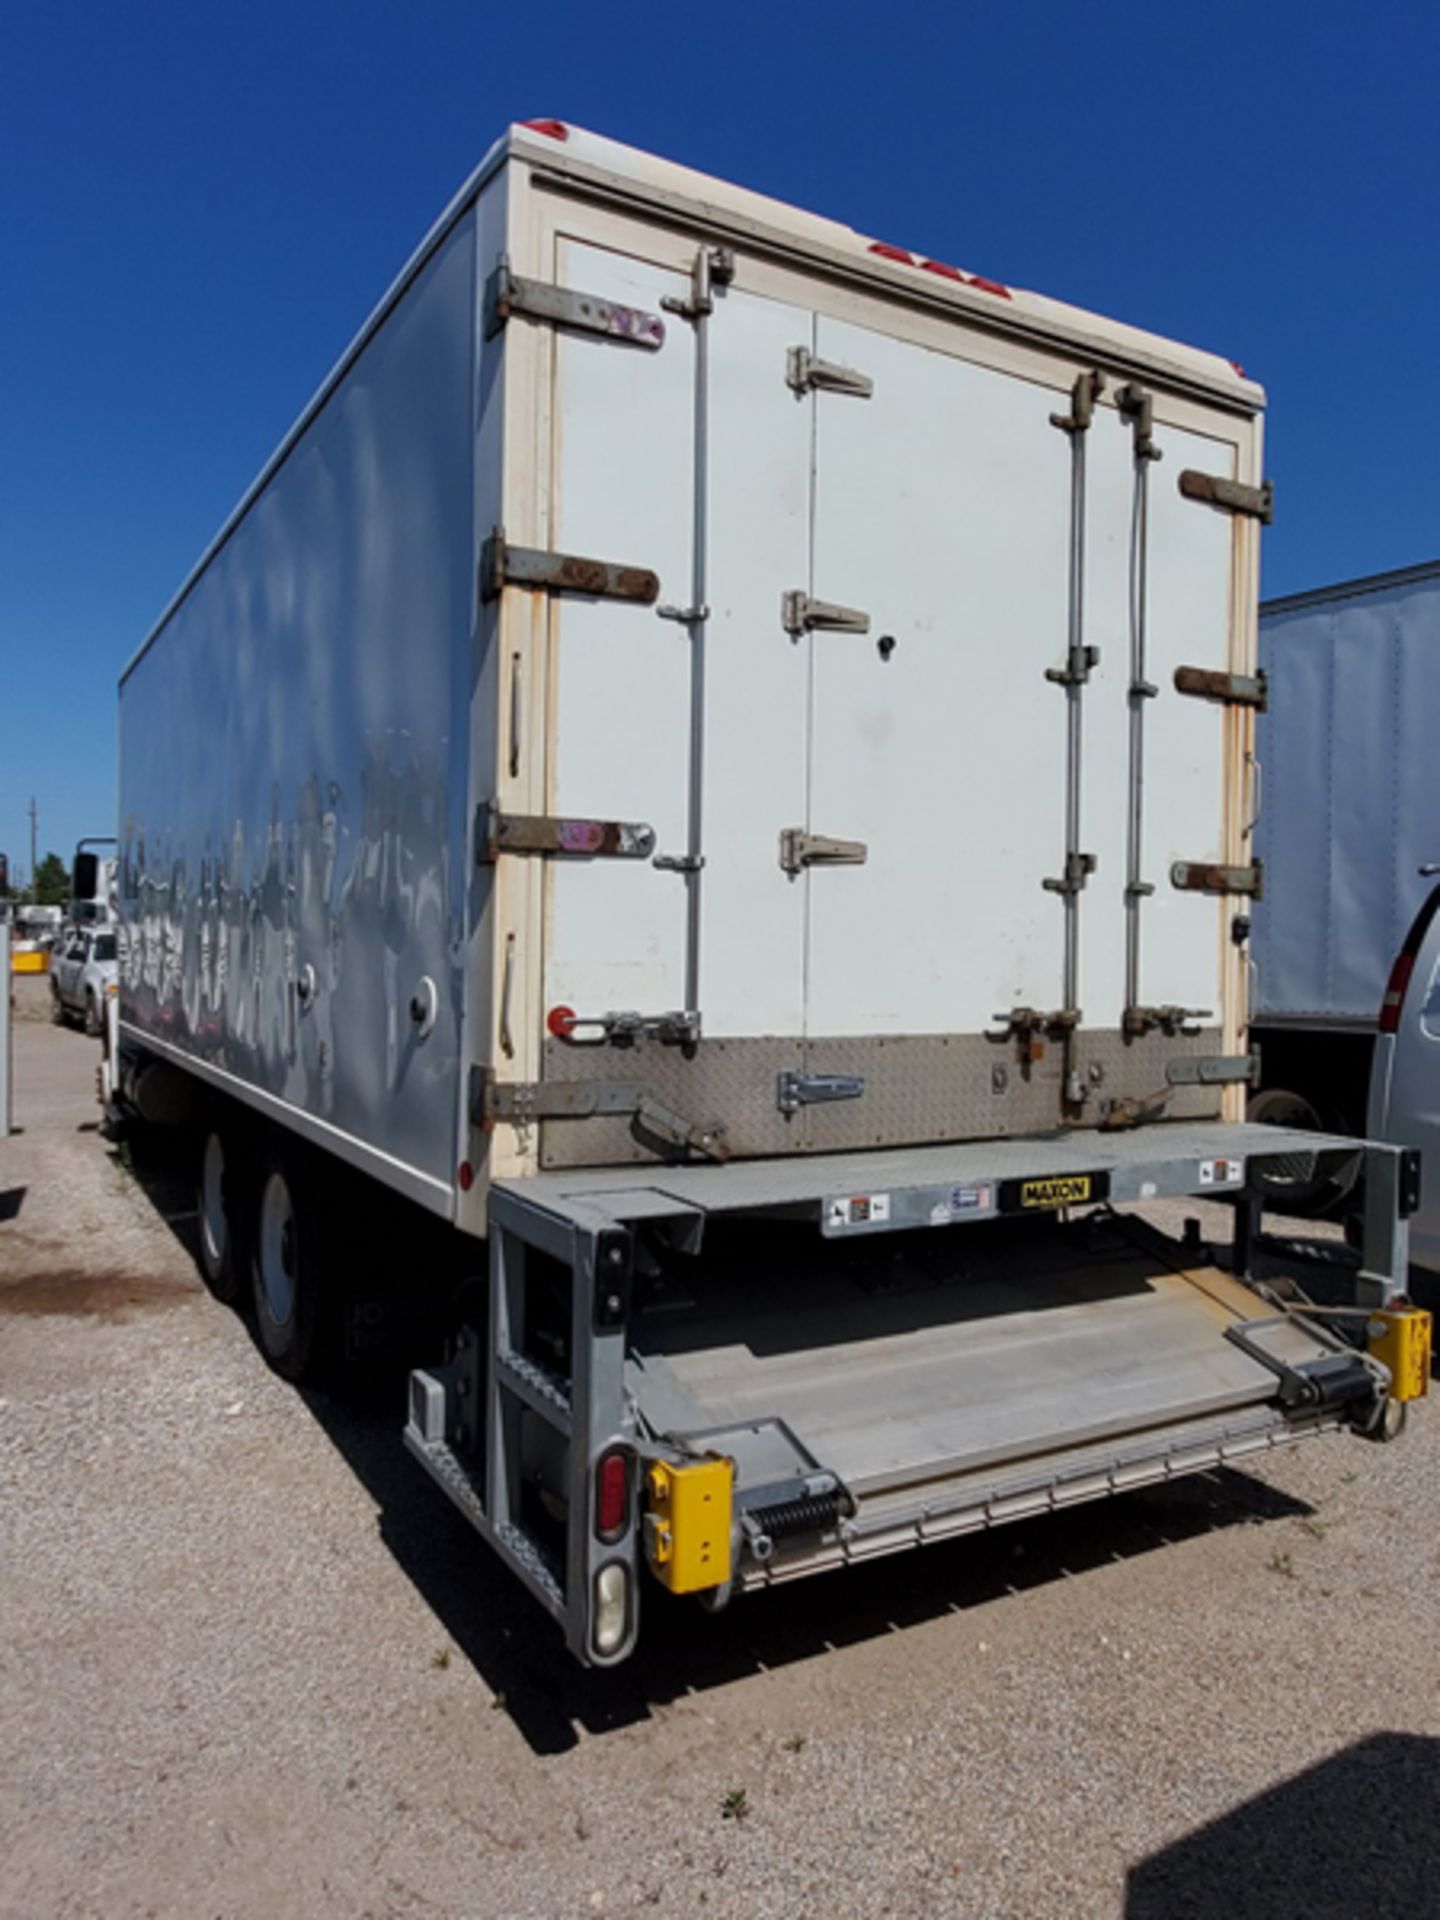 2018 INTERNATIONAL 4400 SBA 6X4 REFRIGERATED BOX TRUCK VIN#: 1HTMSTAR3JH529622, Approx Miles: 60584, - Image 4 of 8